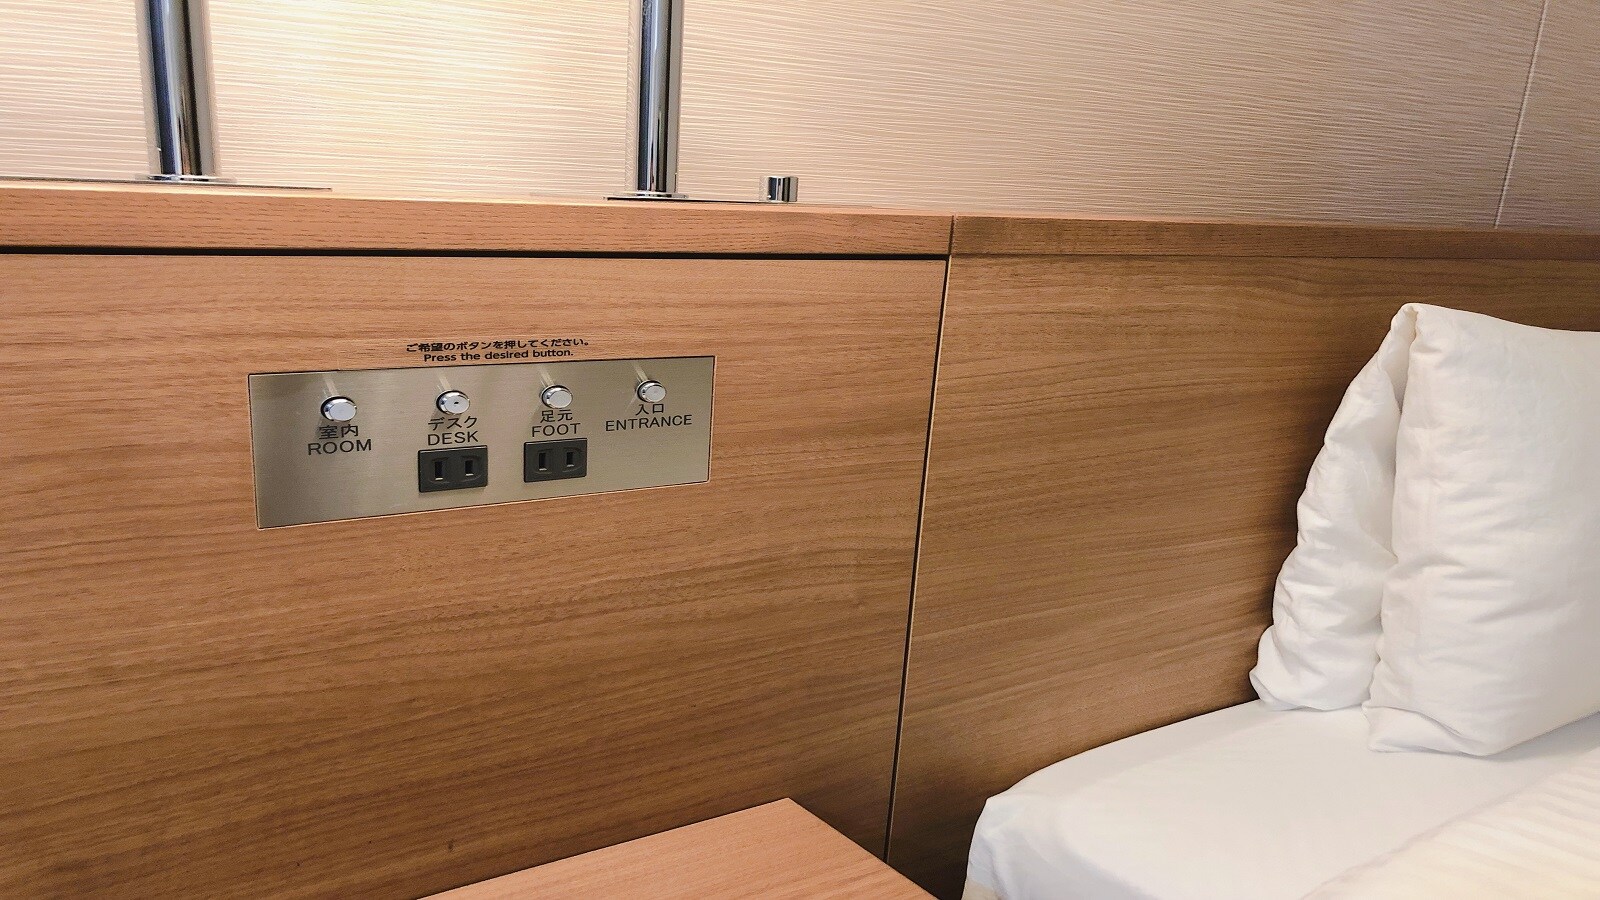 Bedside outlets 2 outlets are available.